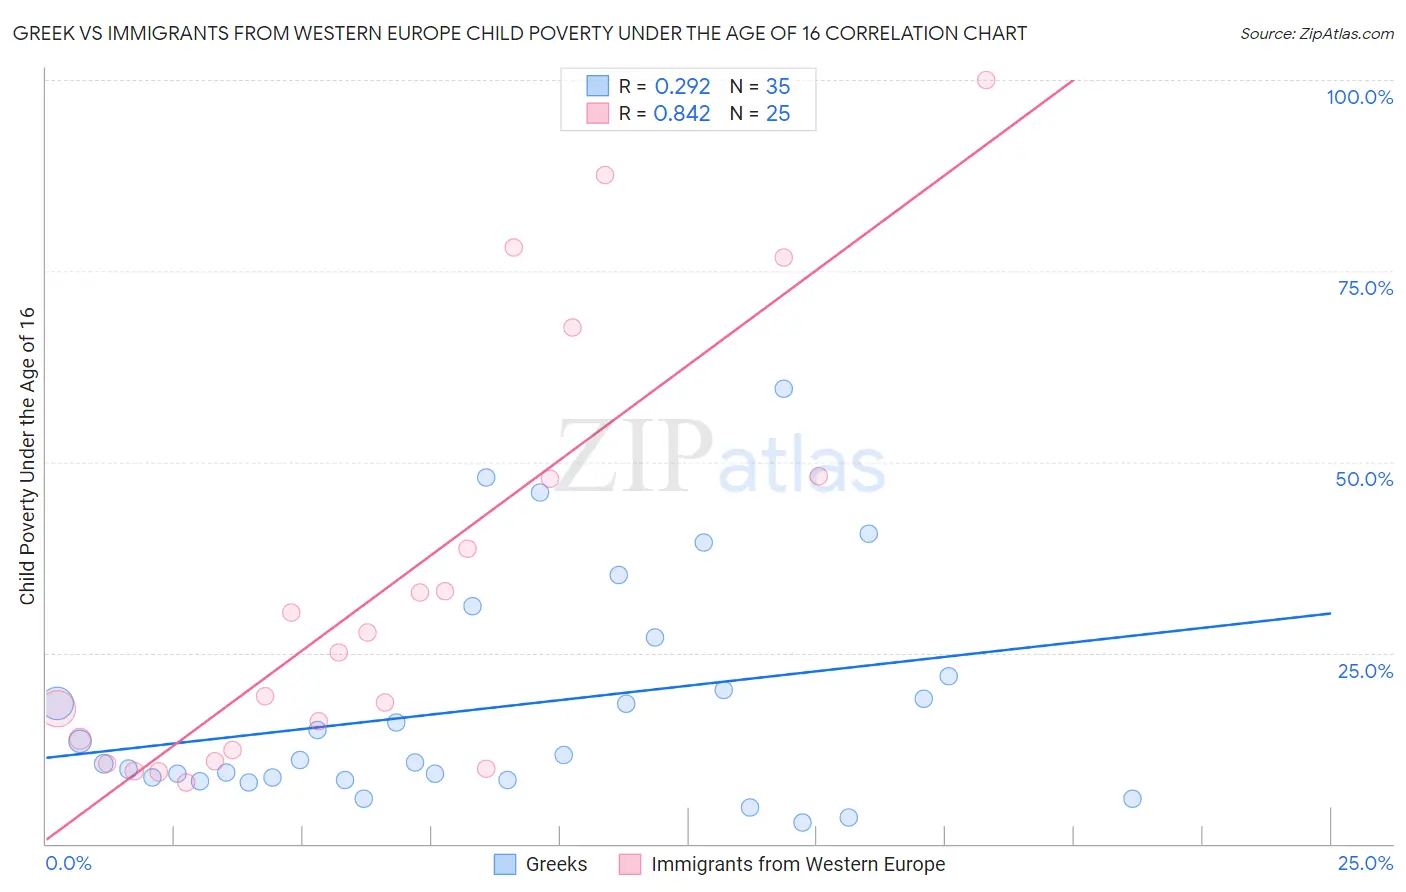 Greek vs Immigrants from Western Europe Child Poverty Under the Age of 16